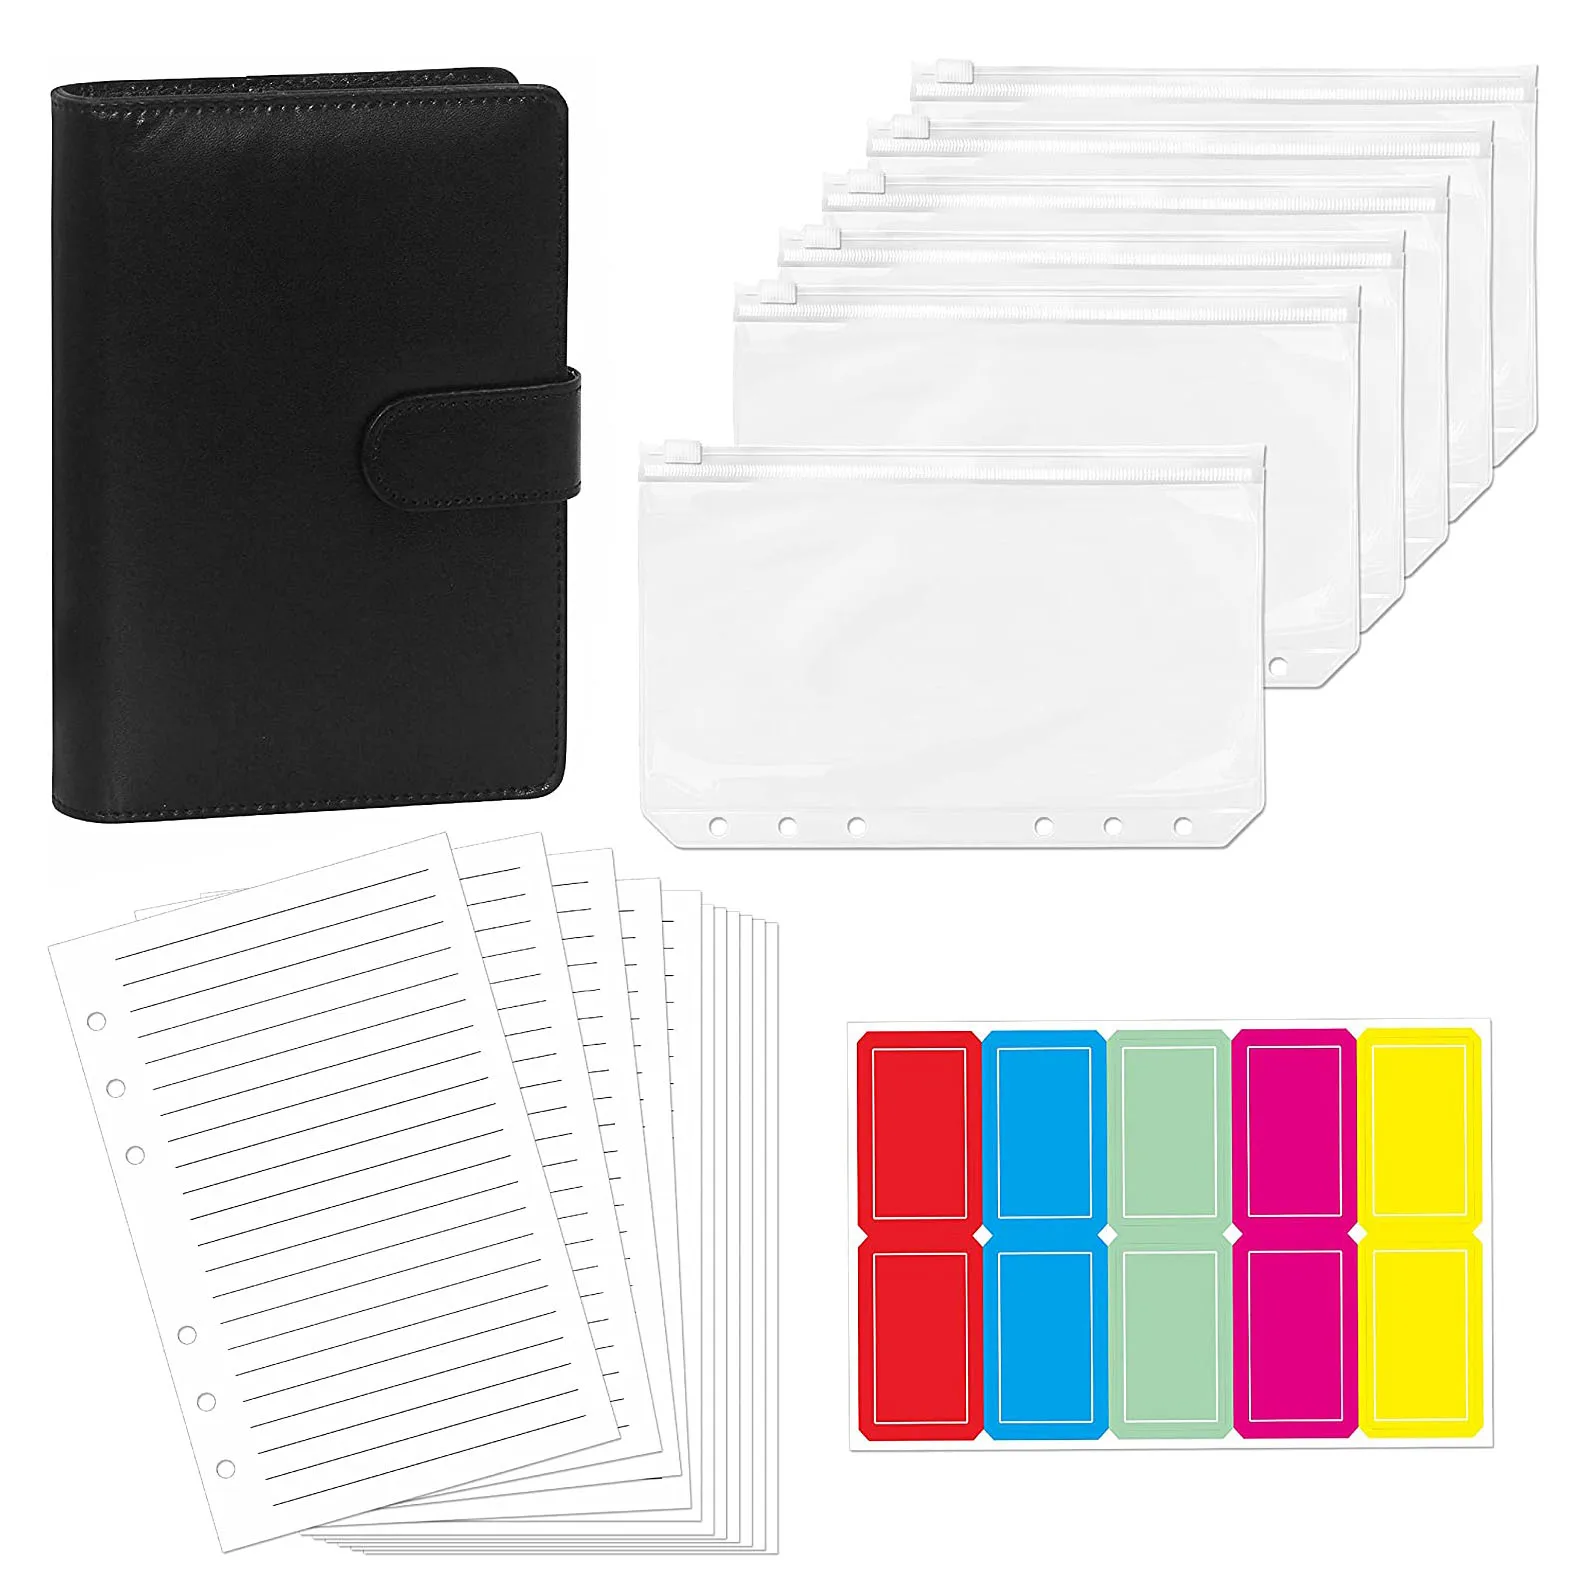 

A6 PU Leather Binder Planner Cash Envelopes for Budgeting and Saving Money with 40 Pages Filler Paper,6 Zipper Bags,10 Stickers